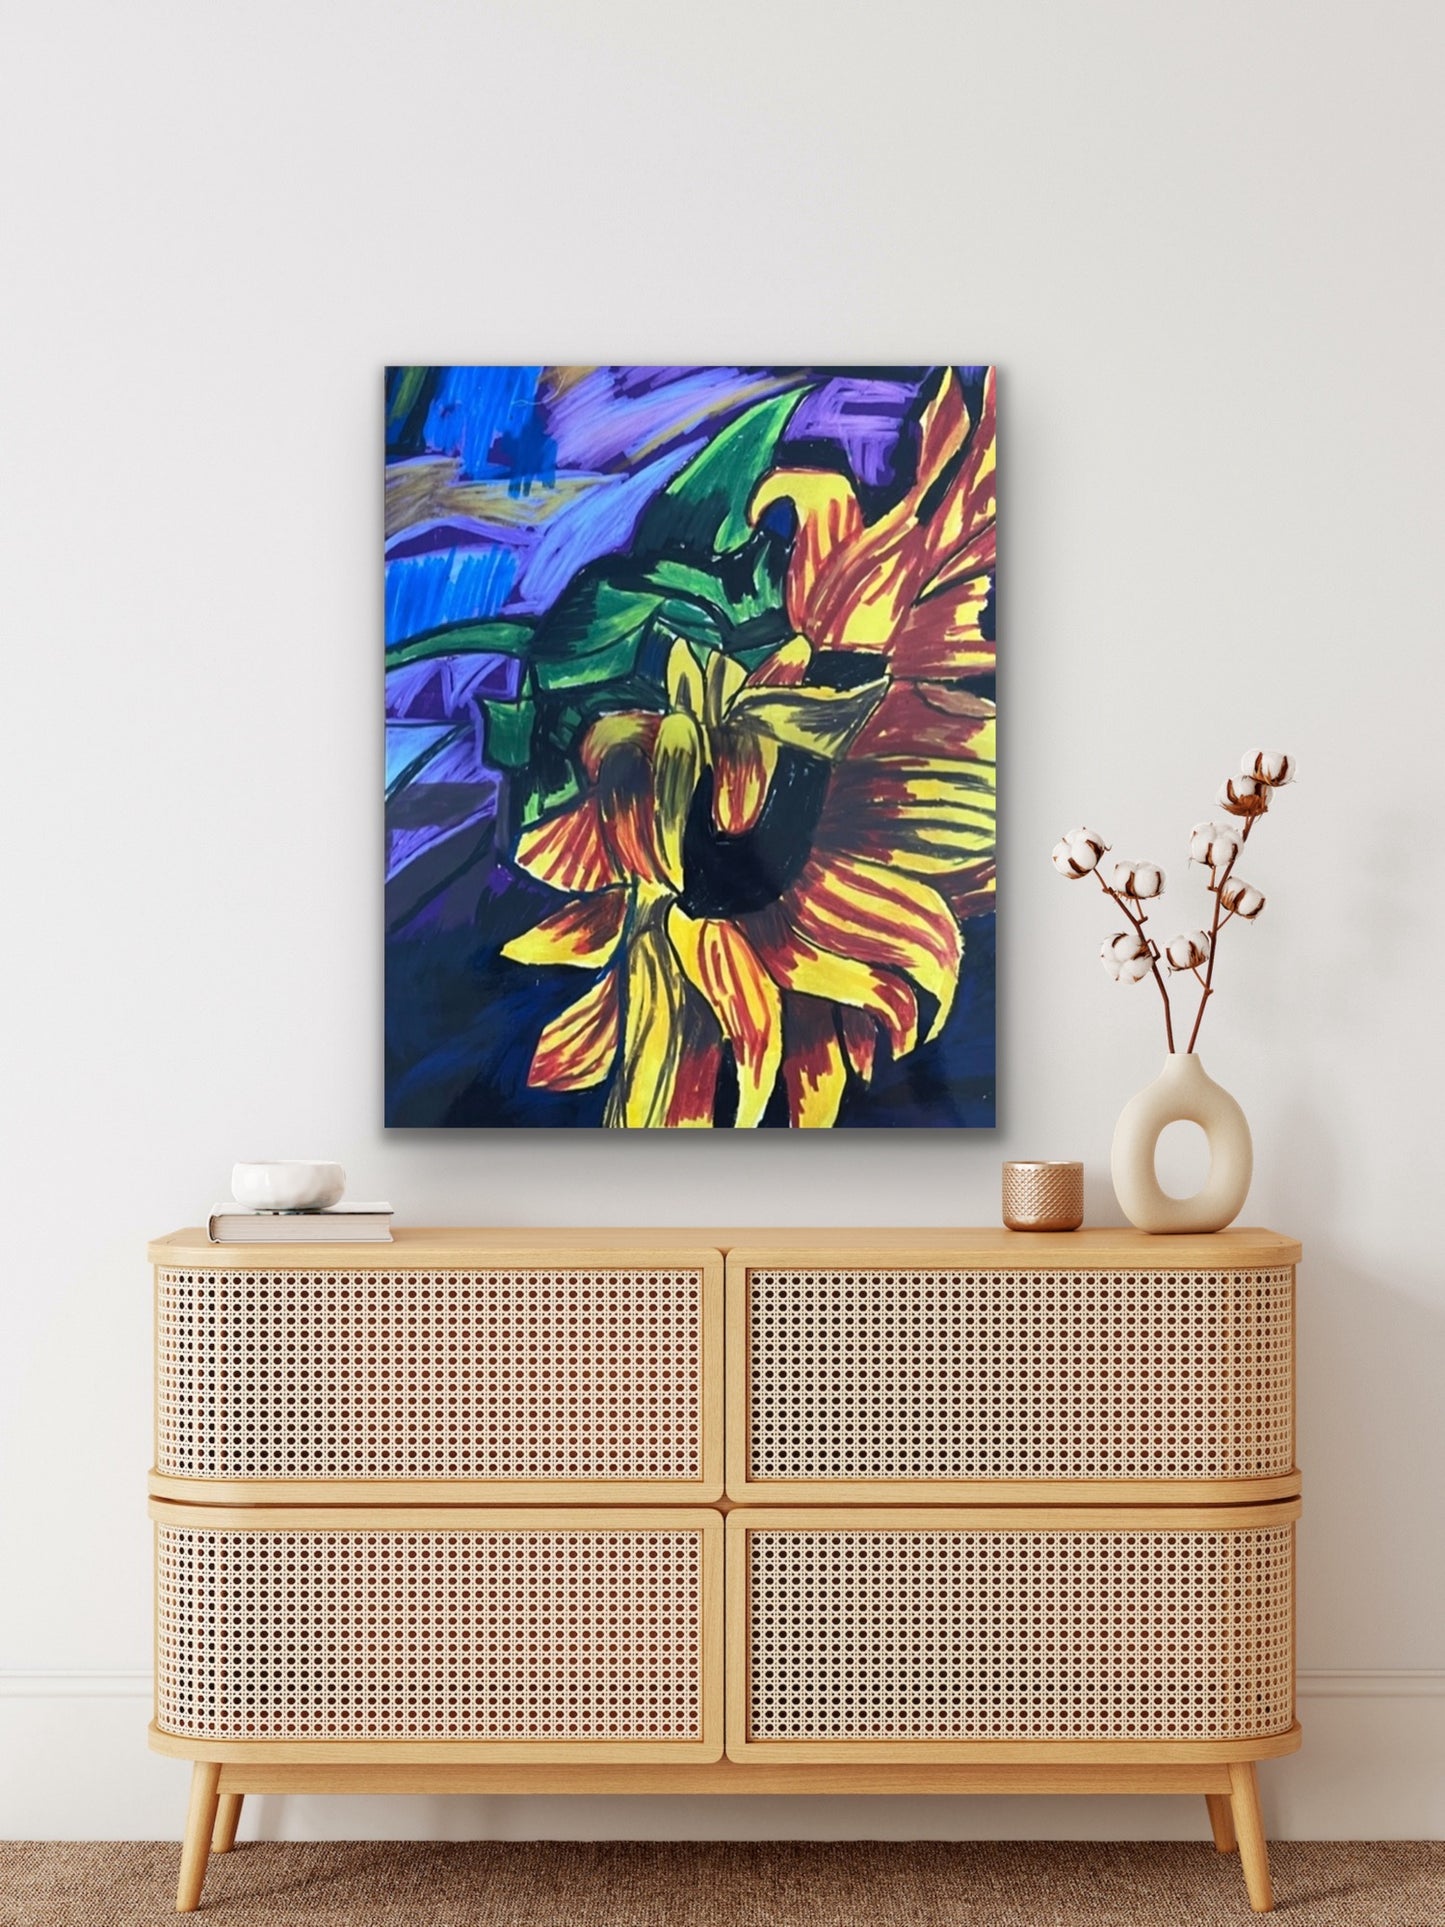 Shy Sunflower - Stretched Canvas Print in more sizes